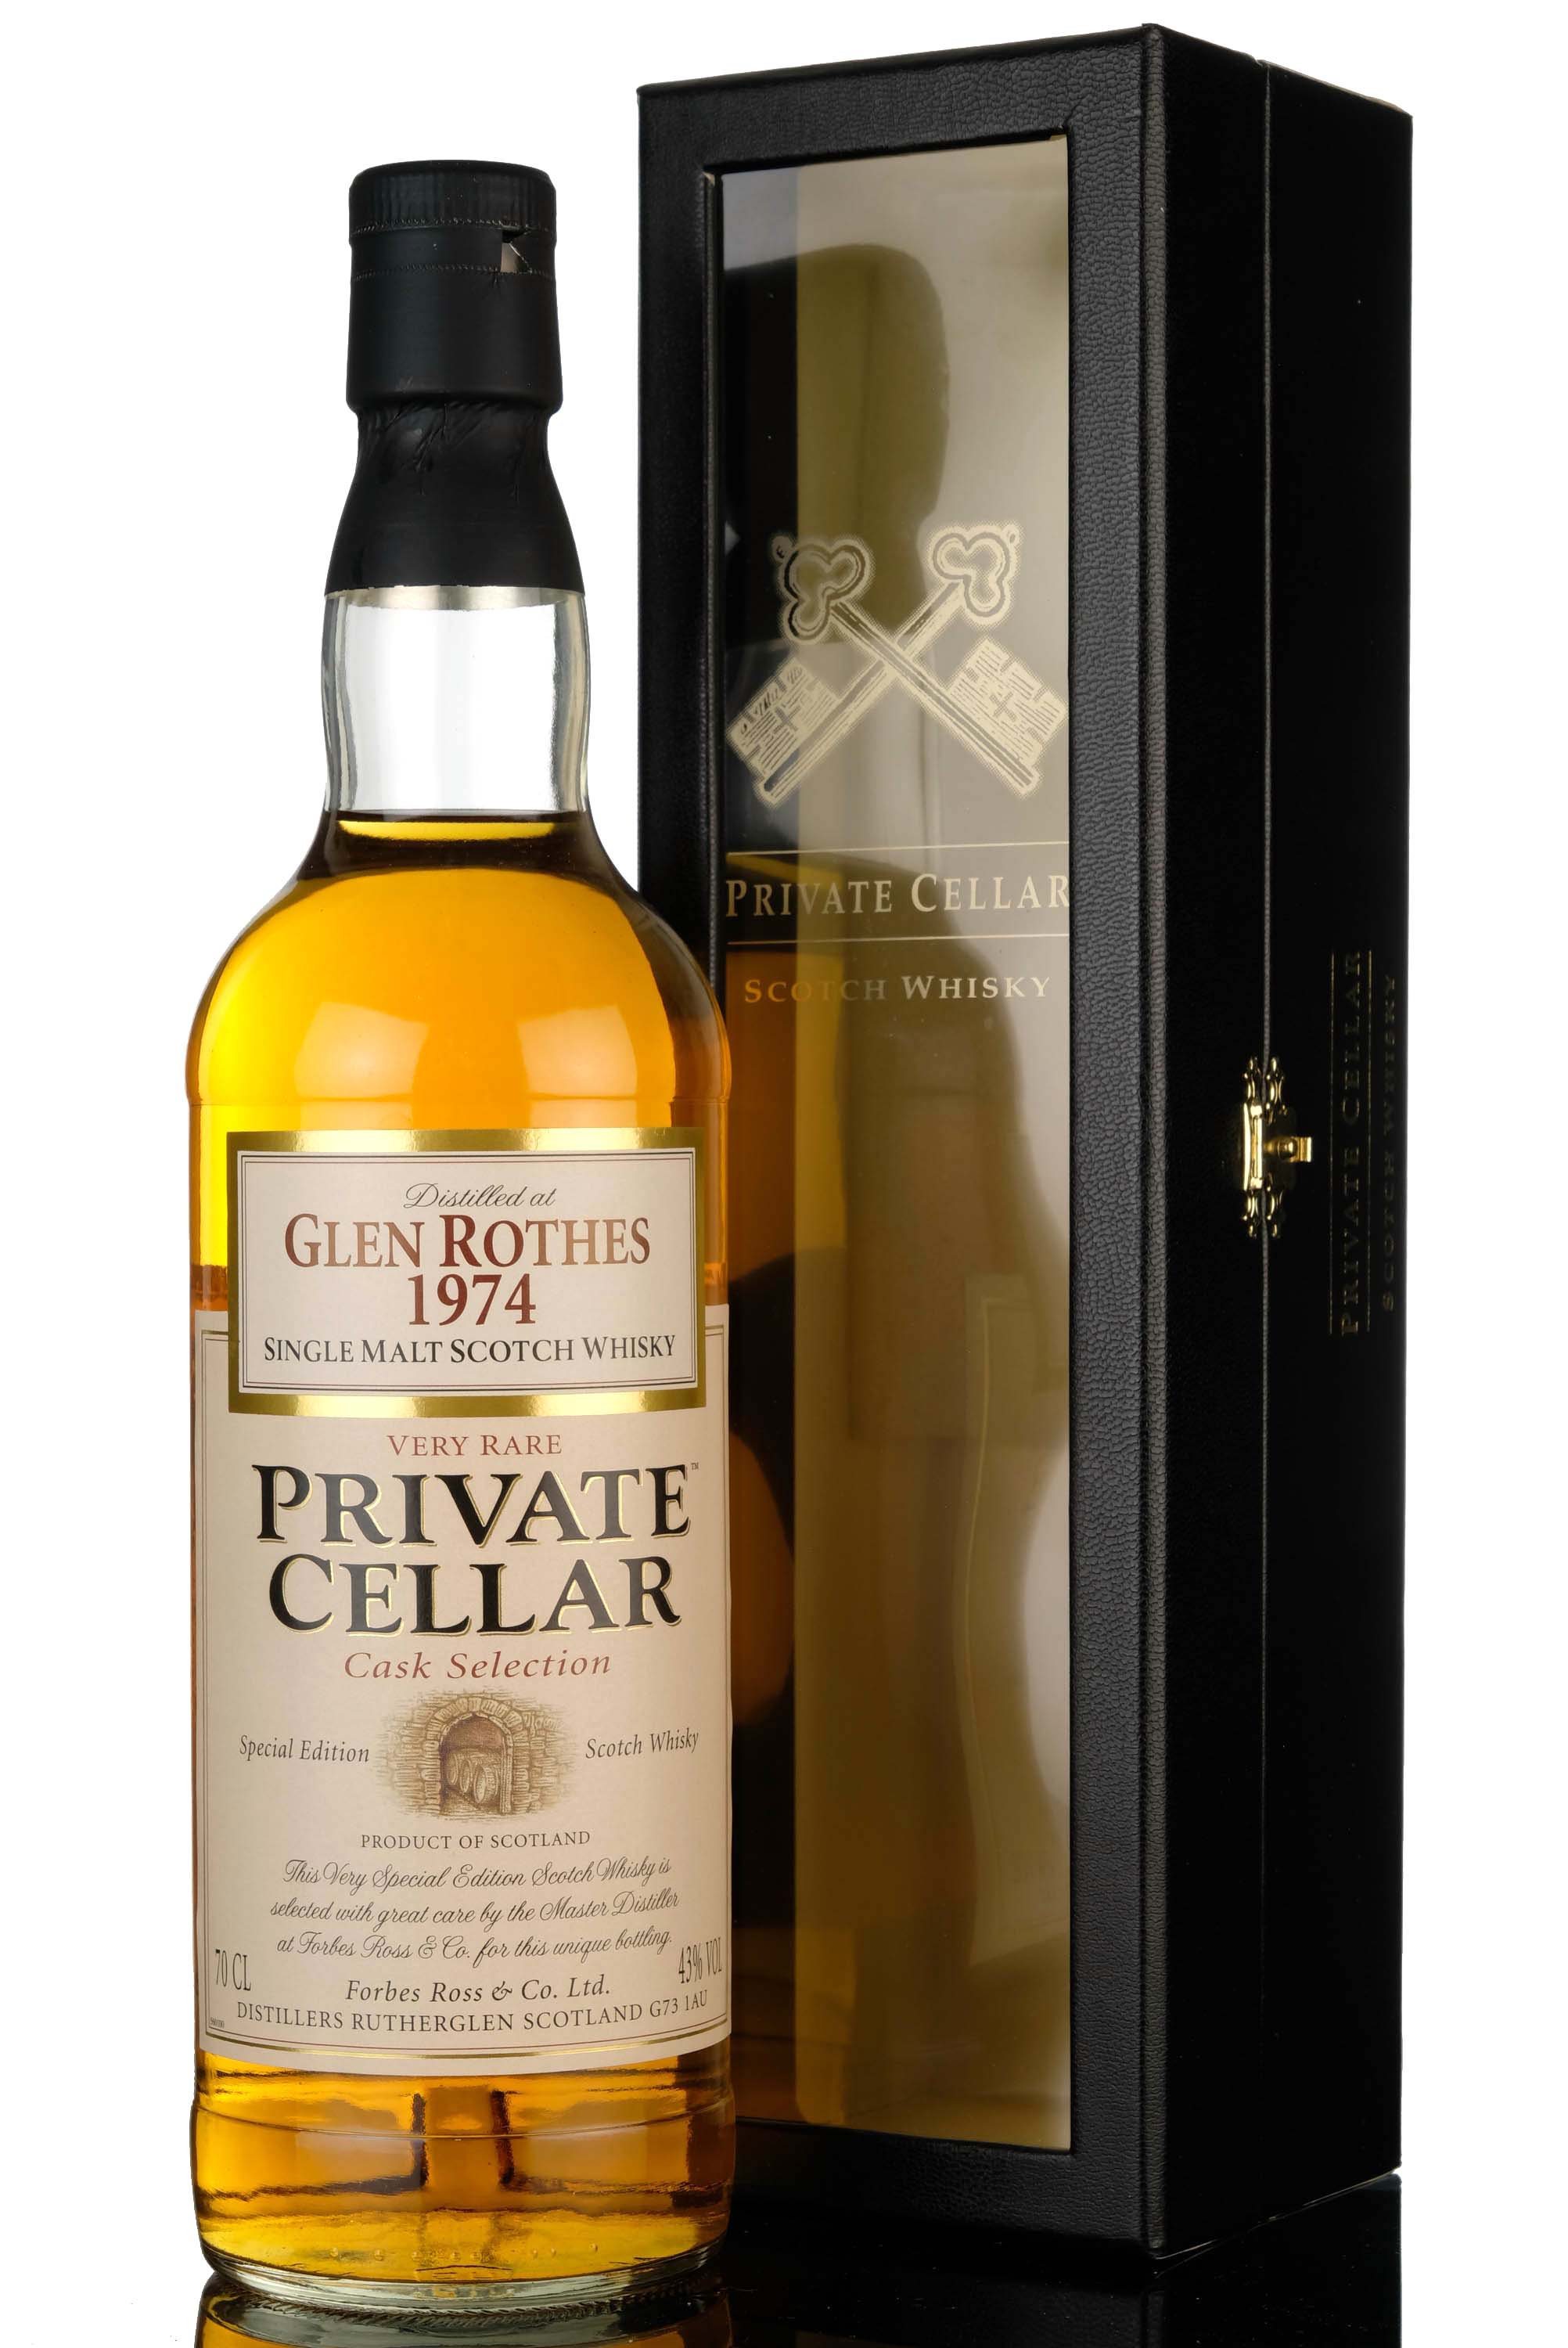 Glenrothes 1974 - Private Cellar